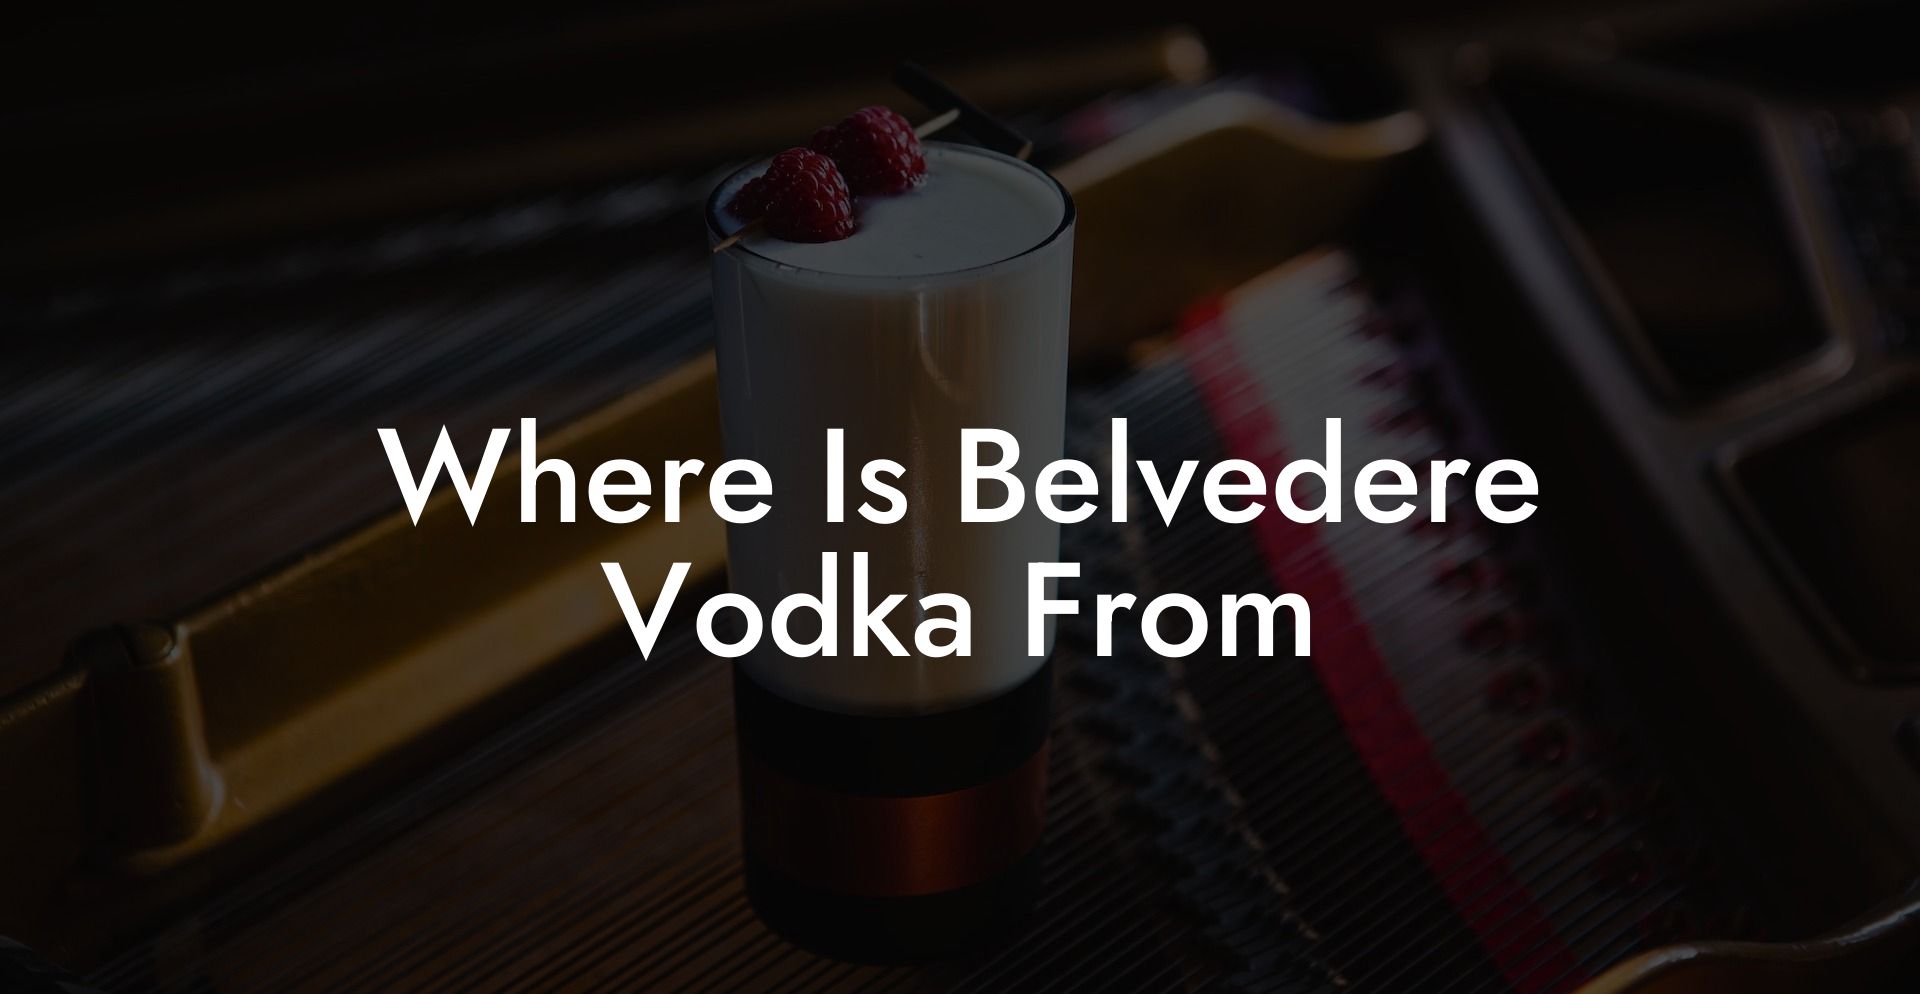 Where Is Belvedere Vodka From